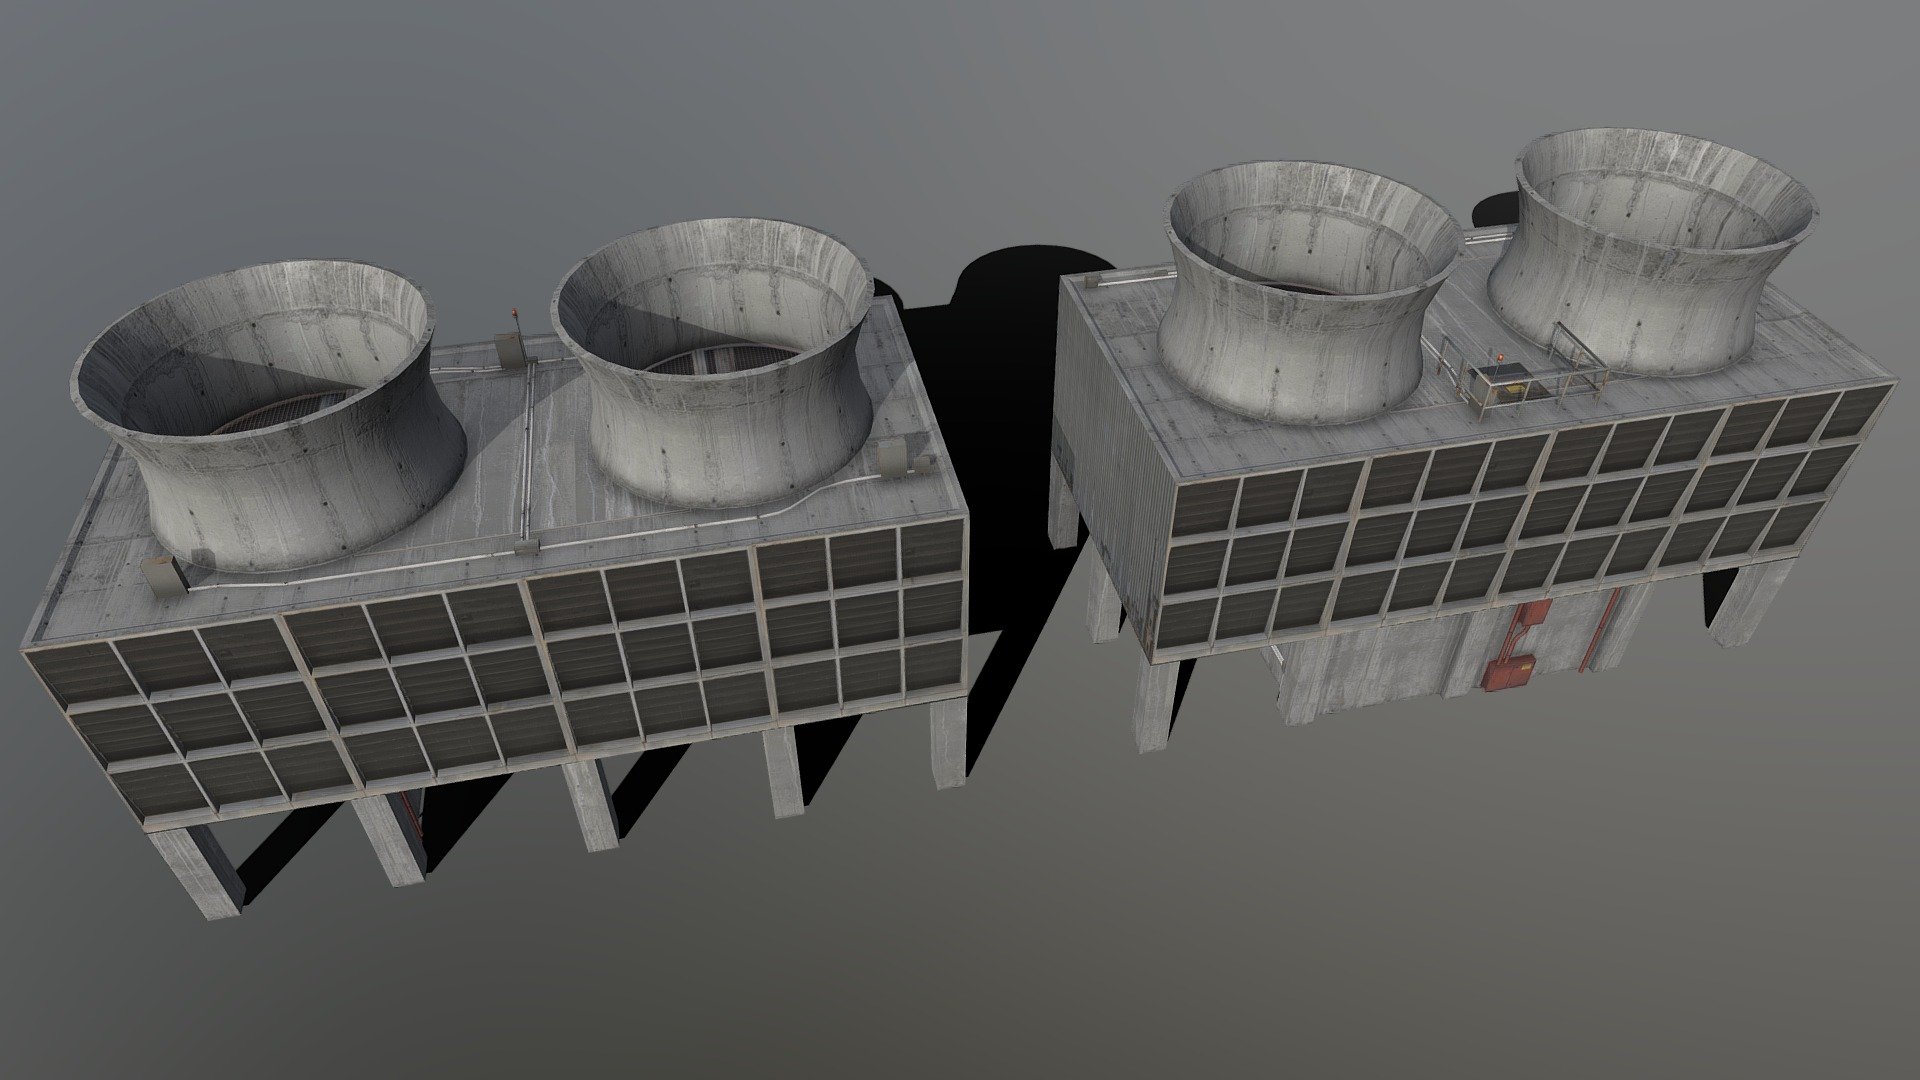 Process cooling units, found at large facilities and industrial works. 

Low-poly, optimized, and ready for use in games or realtime applications. 4k diffuse/roughness/normal textures 3d model